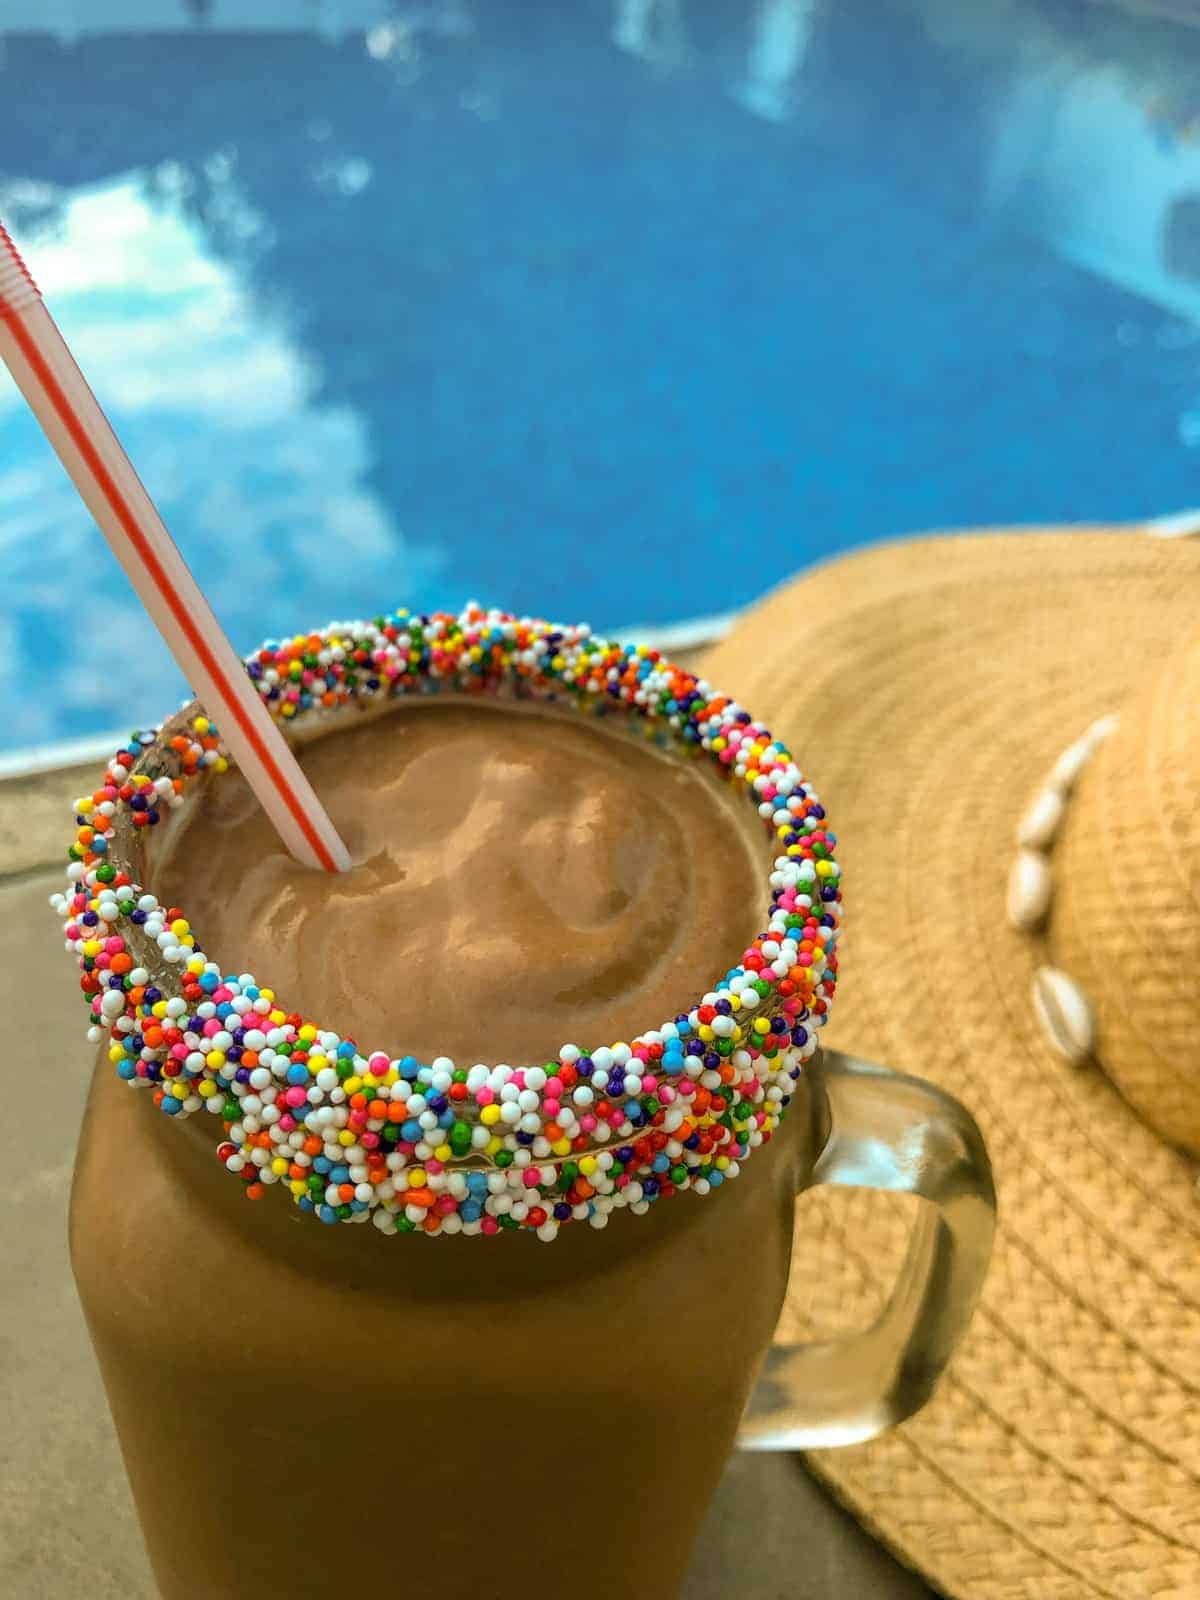 Chocolate Avocado Milkshake in a clear glass jar mug with colored sprinkles on the rim by the pool with a straw hat